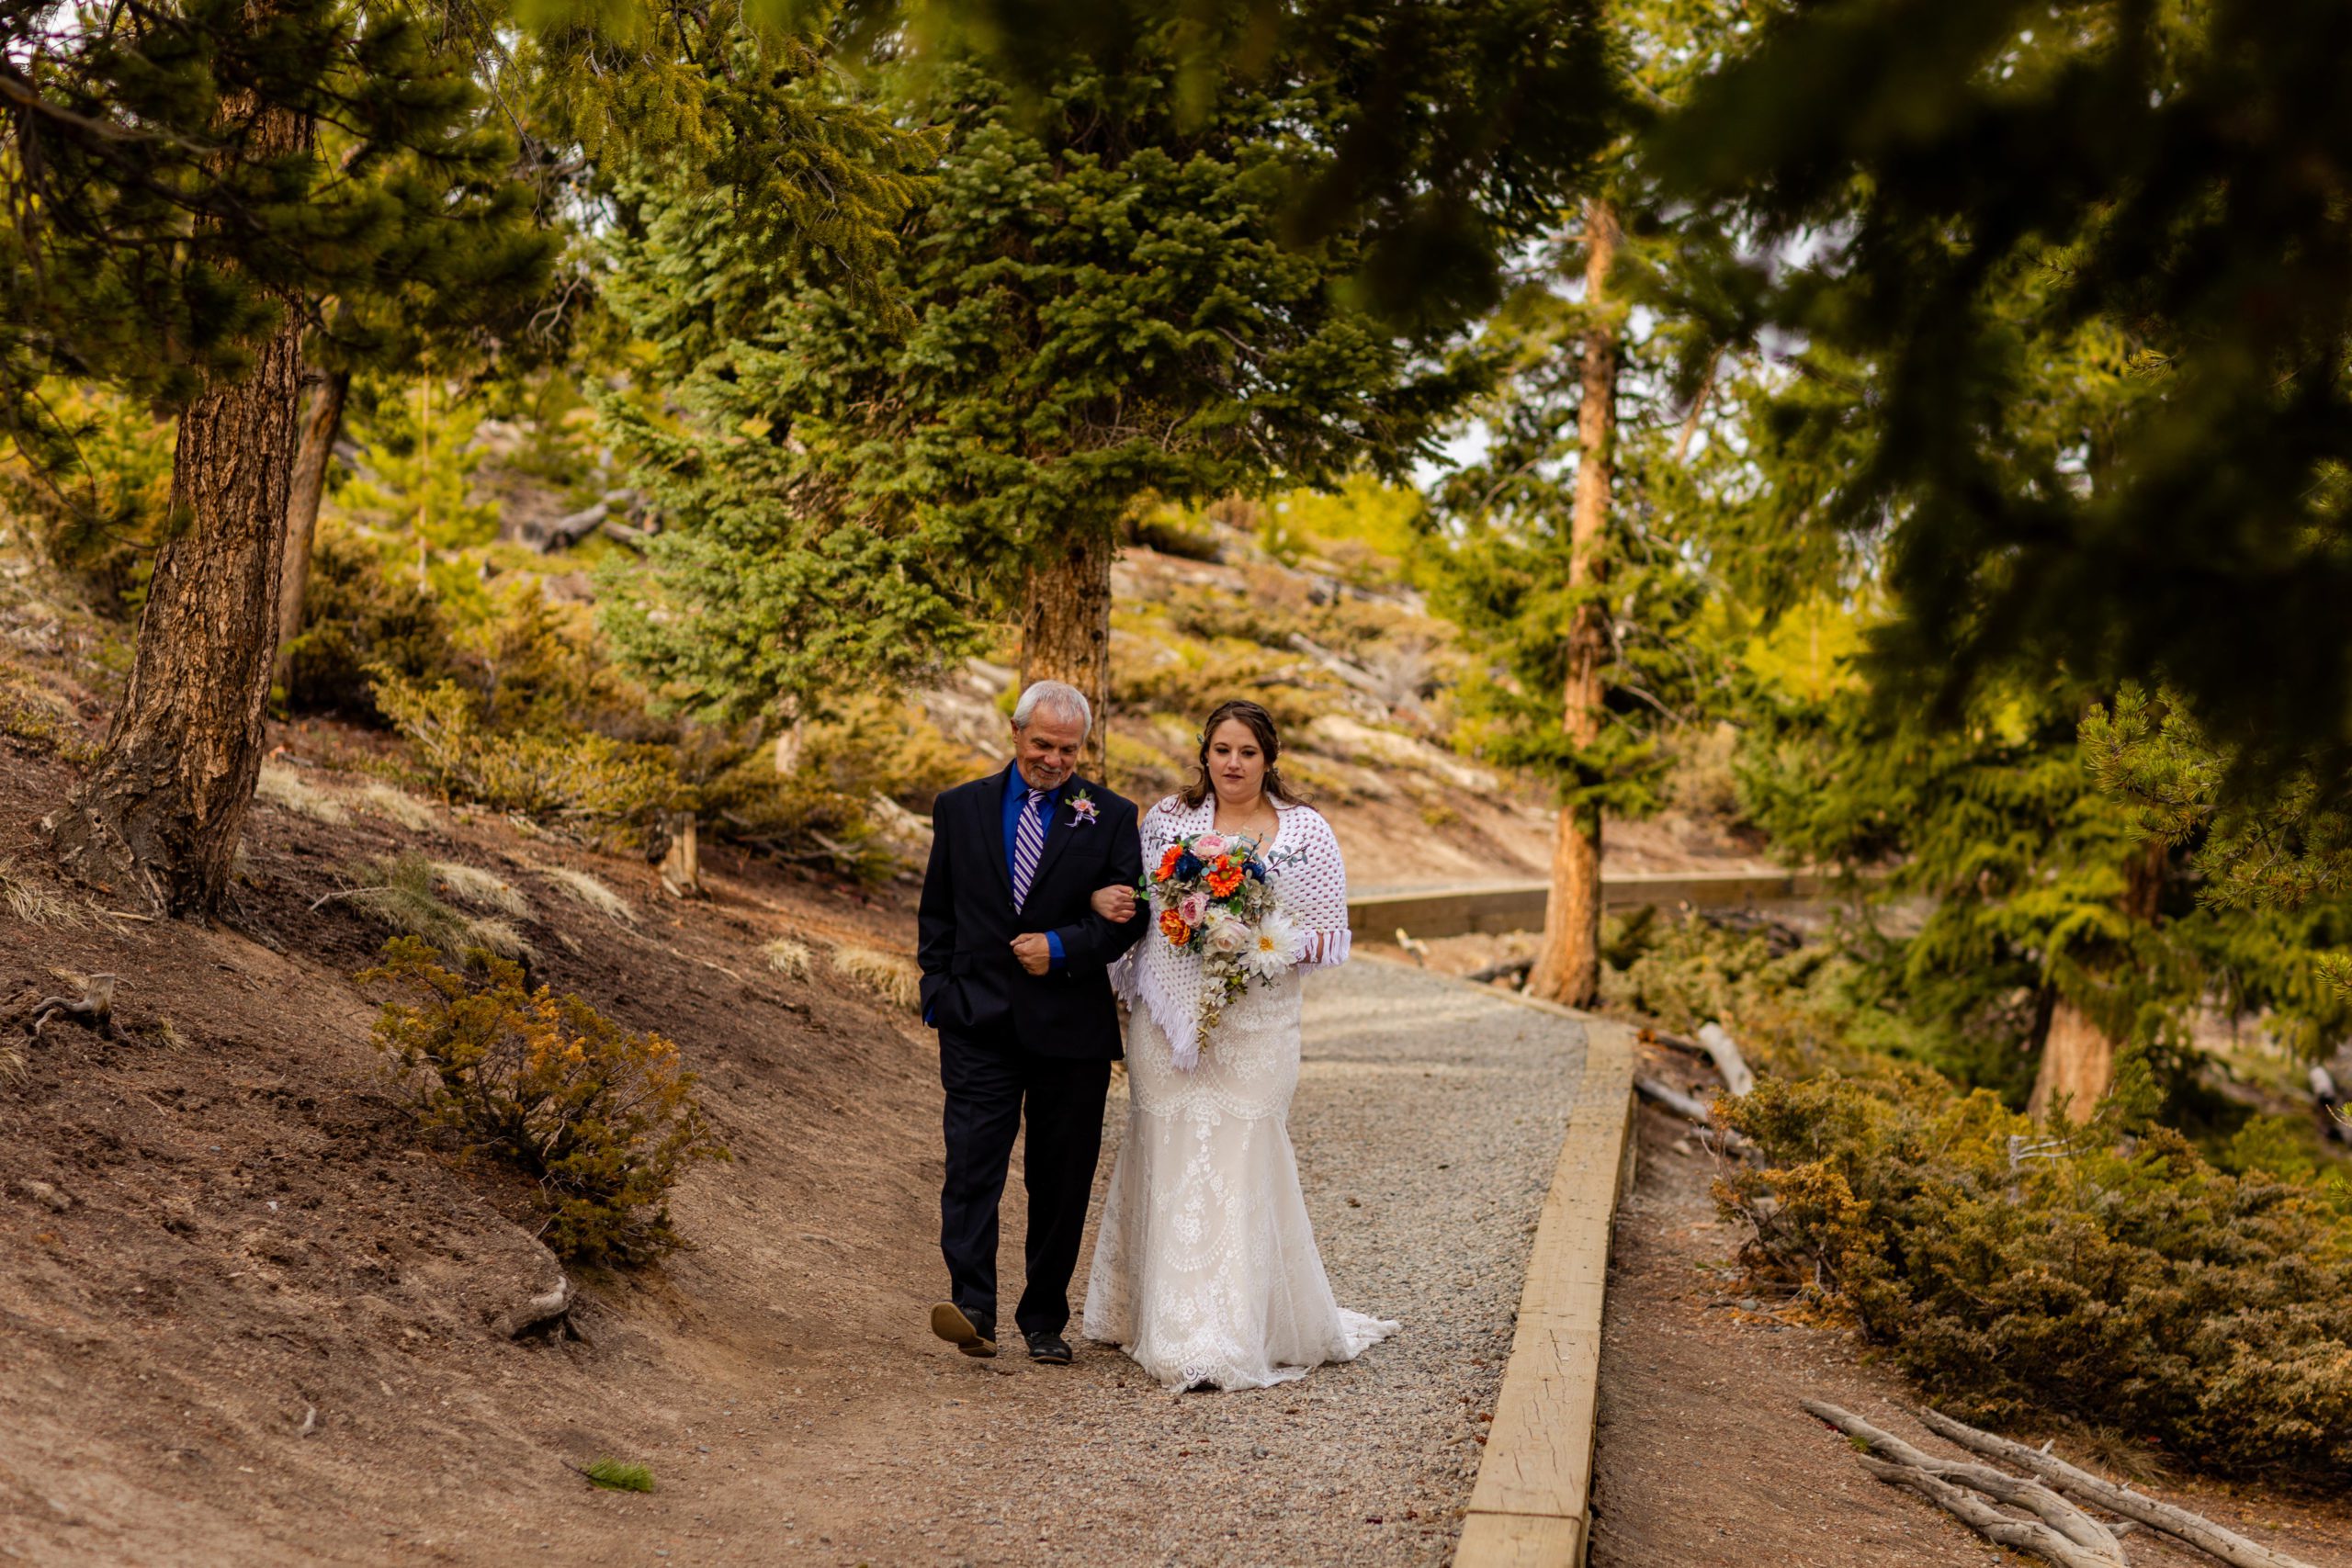 The bride walks down the aisle with her father at her Sapphire Point Elopement.